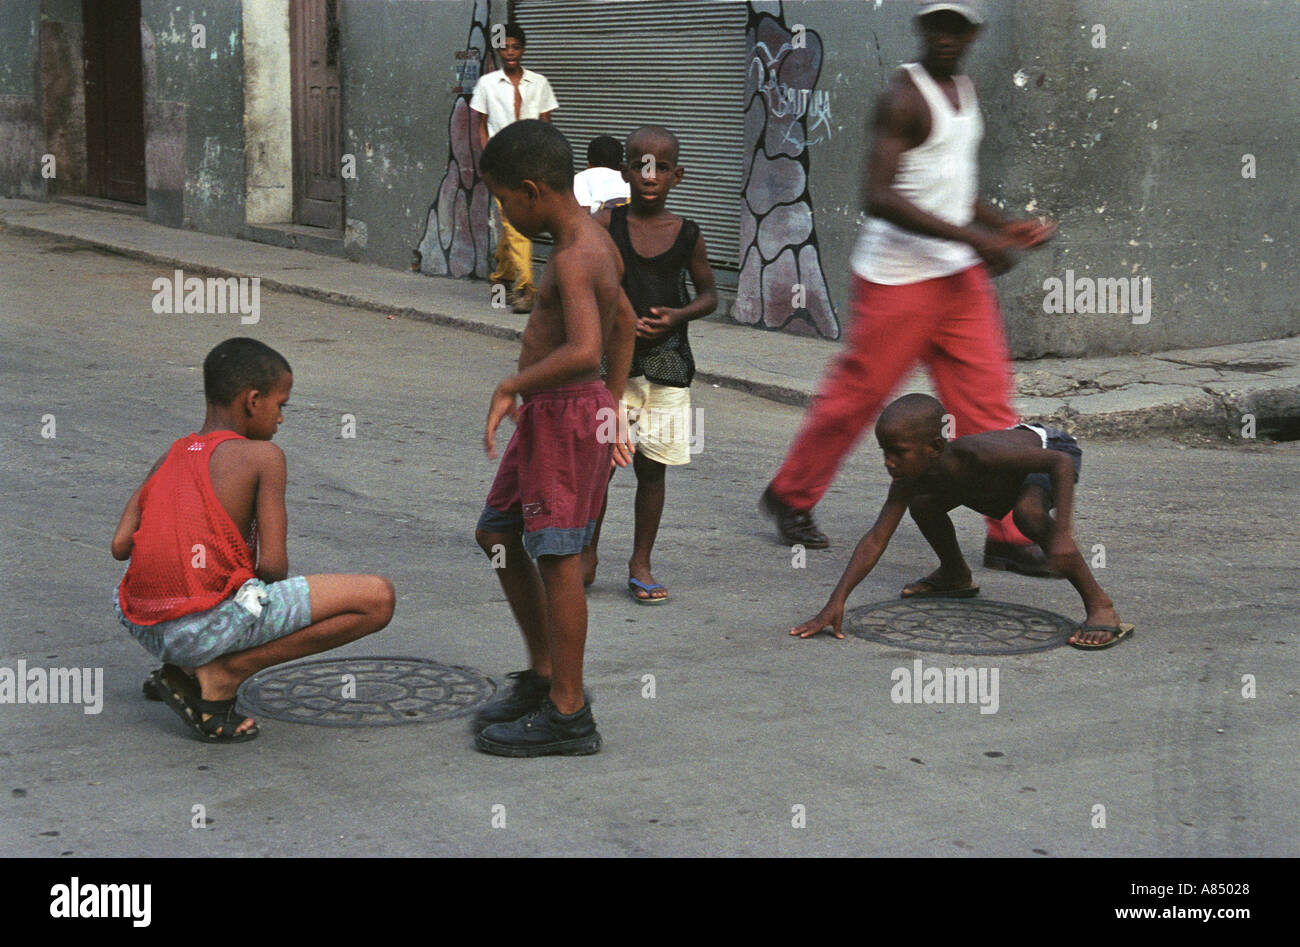 Young cuban boys in streets of Central havana participate in game of marbles as pedestrians look on Stock Photo